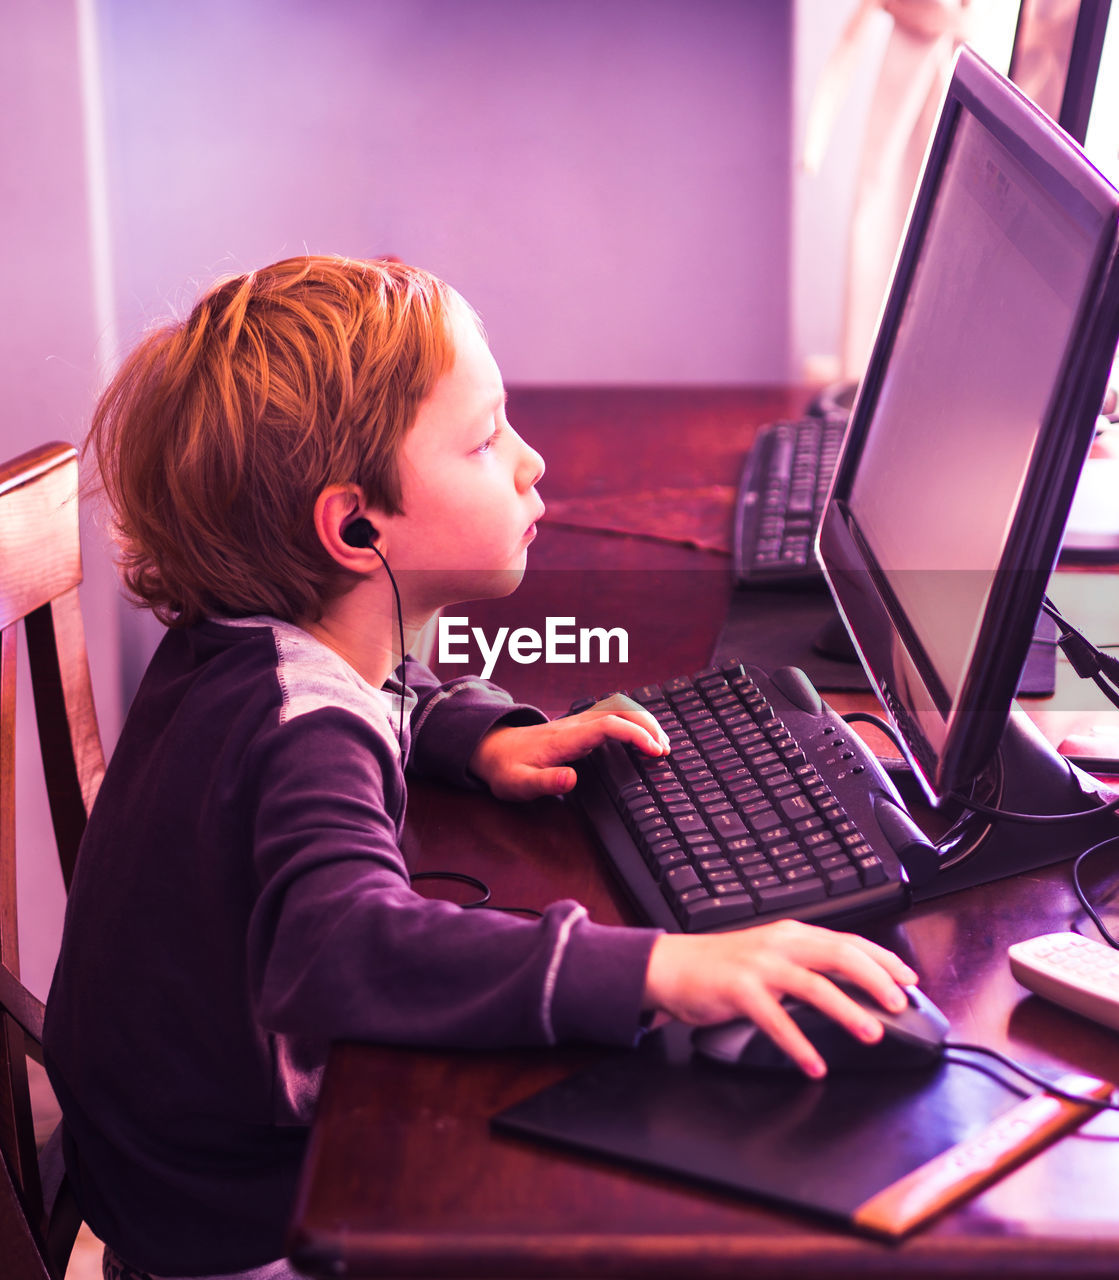 Side view of boy using computer at table